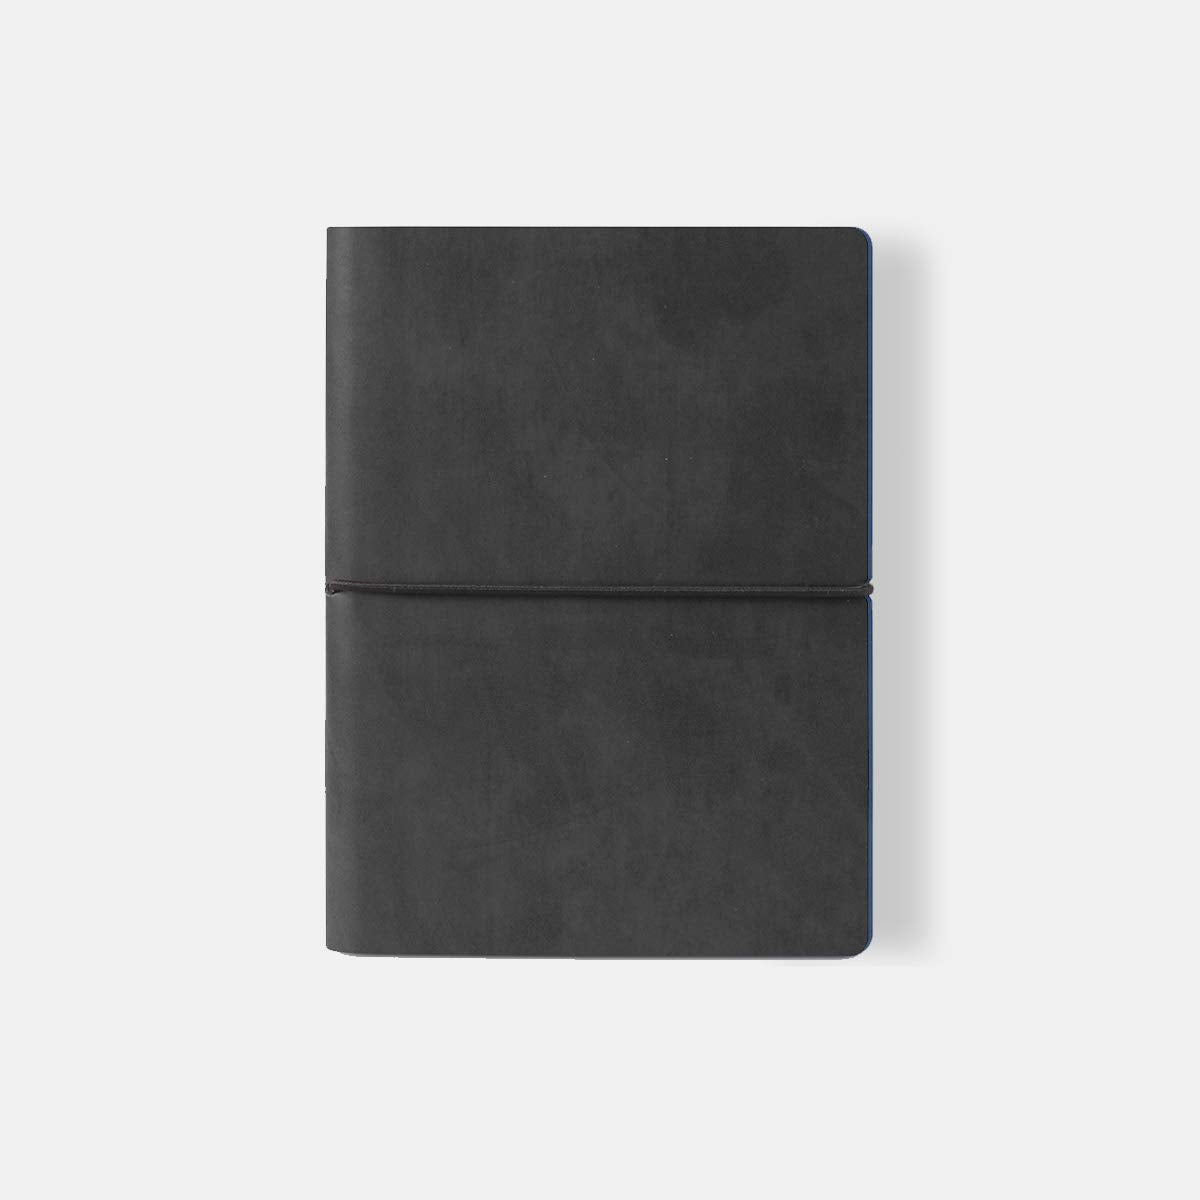 Ciak Smartbook Note Book Black - Blank Paper for Artists